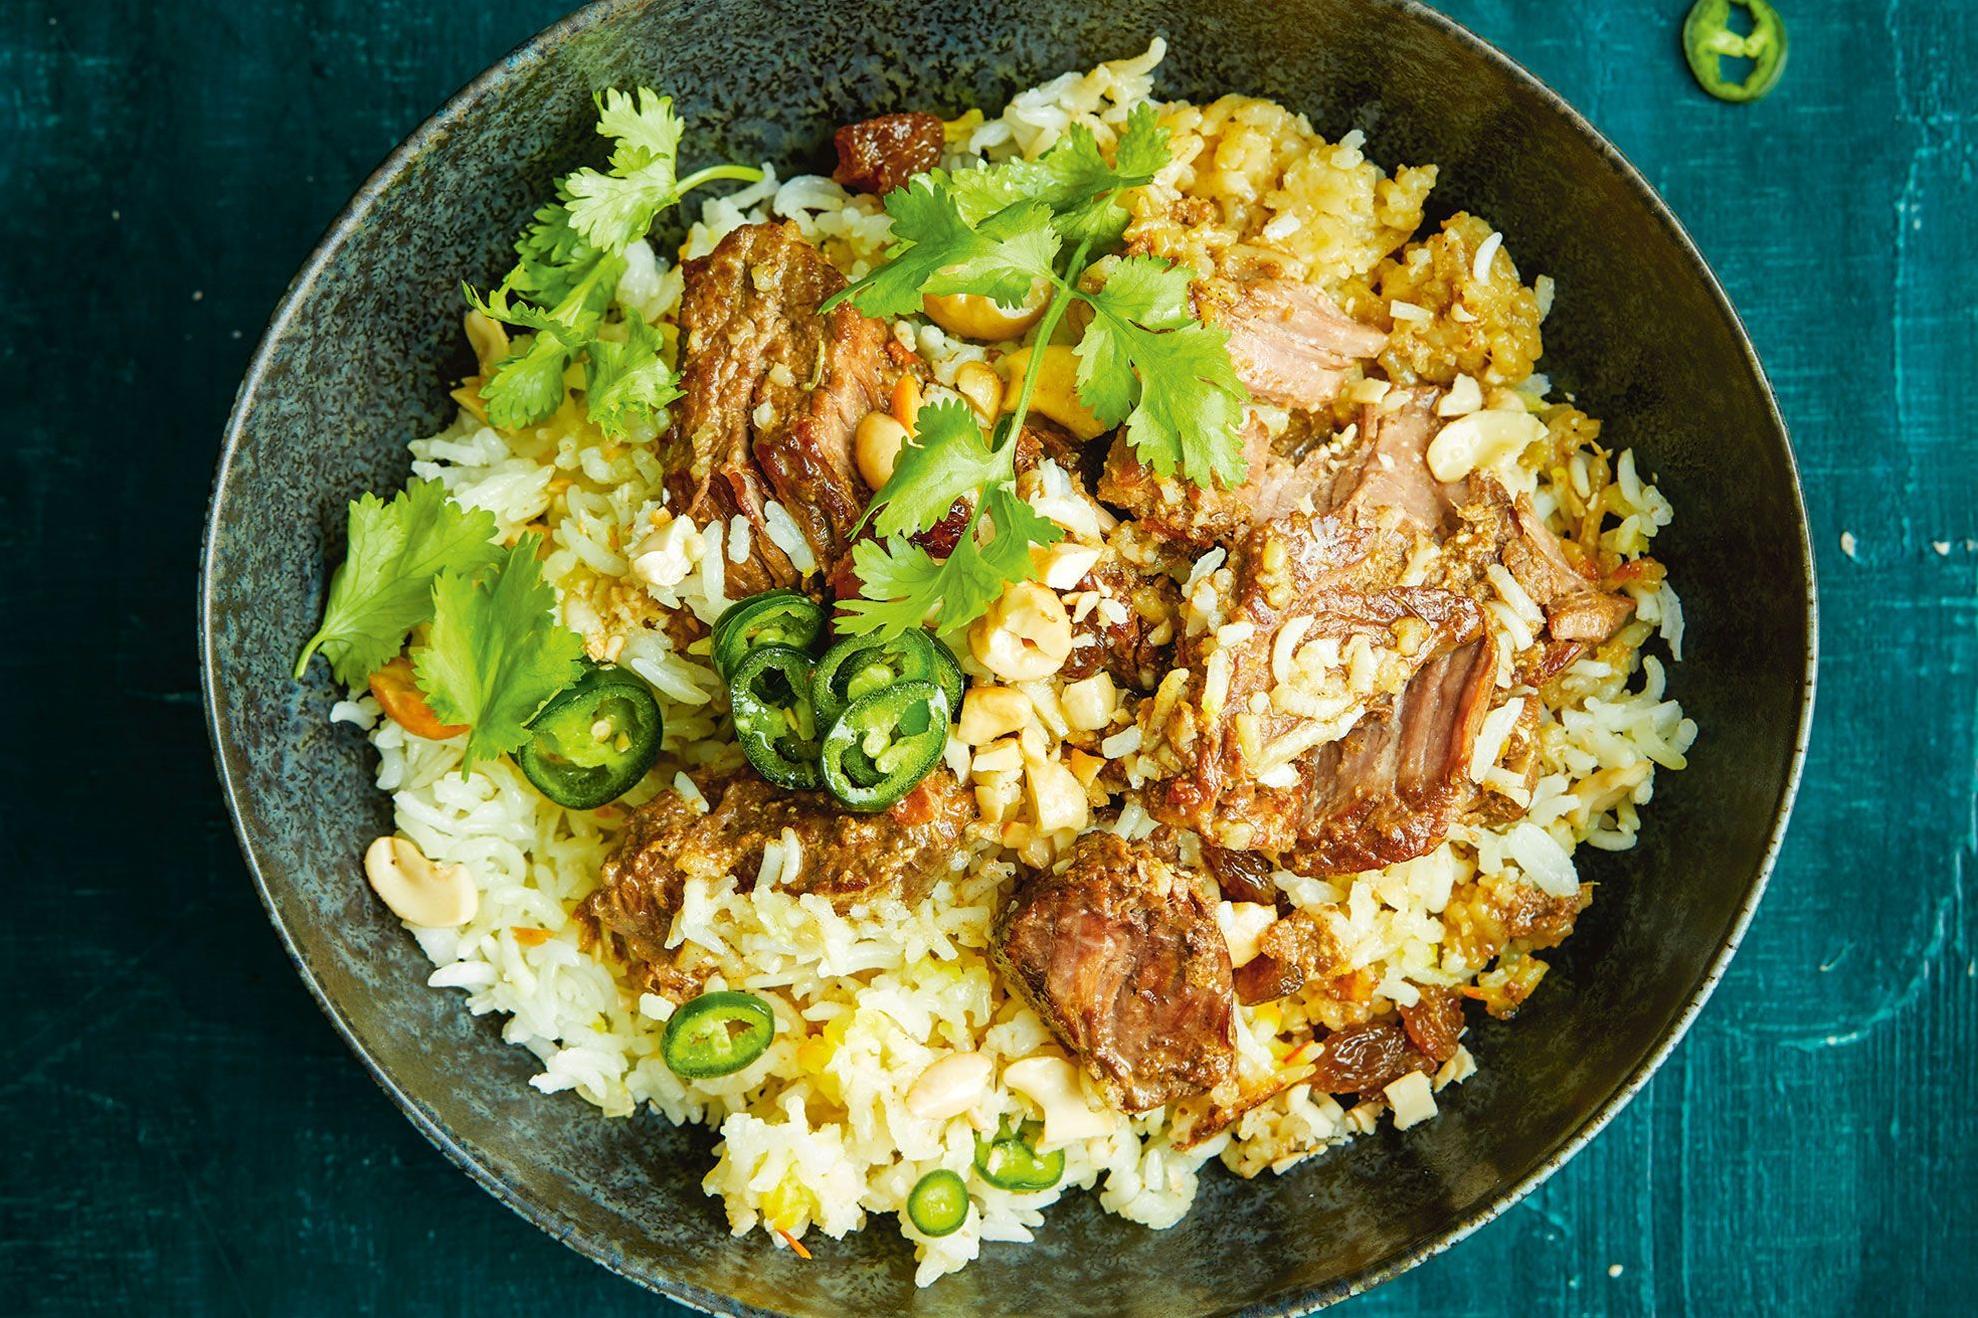  I dare you to resist taking a bite of this mouth-watering Beef Biryani